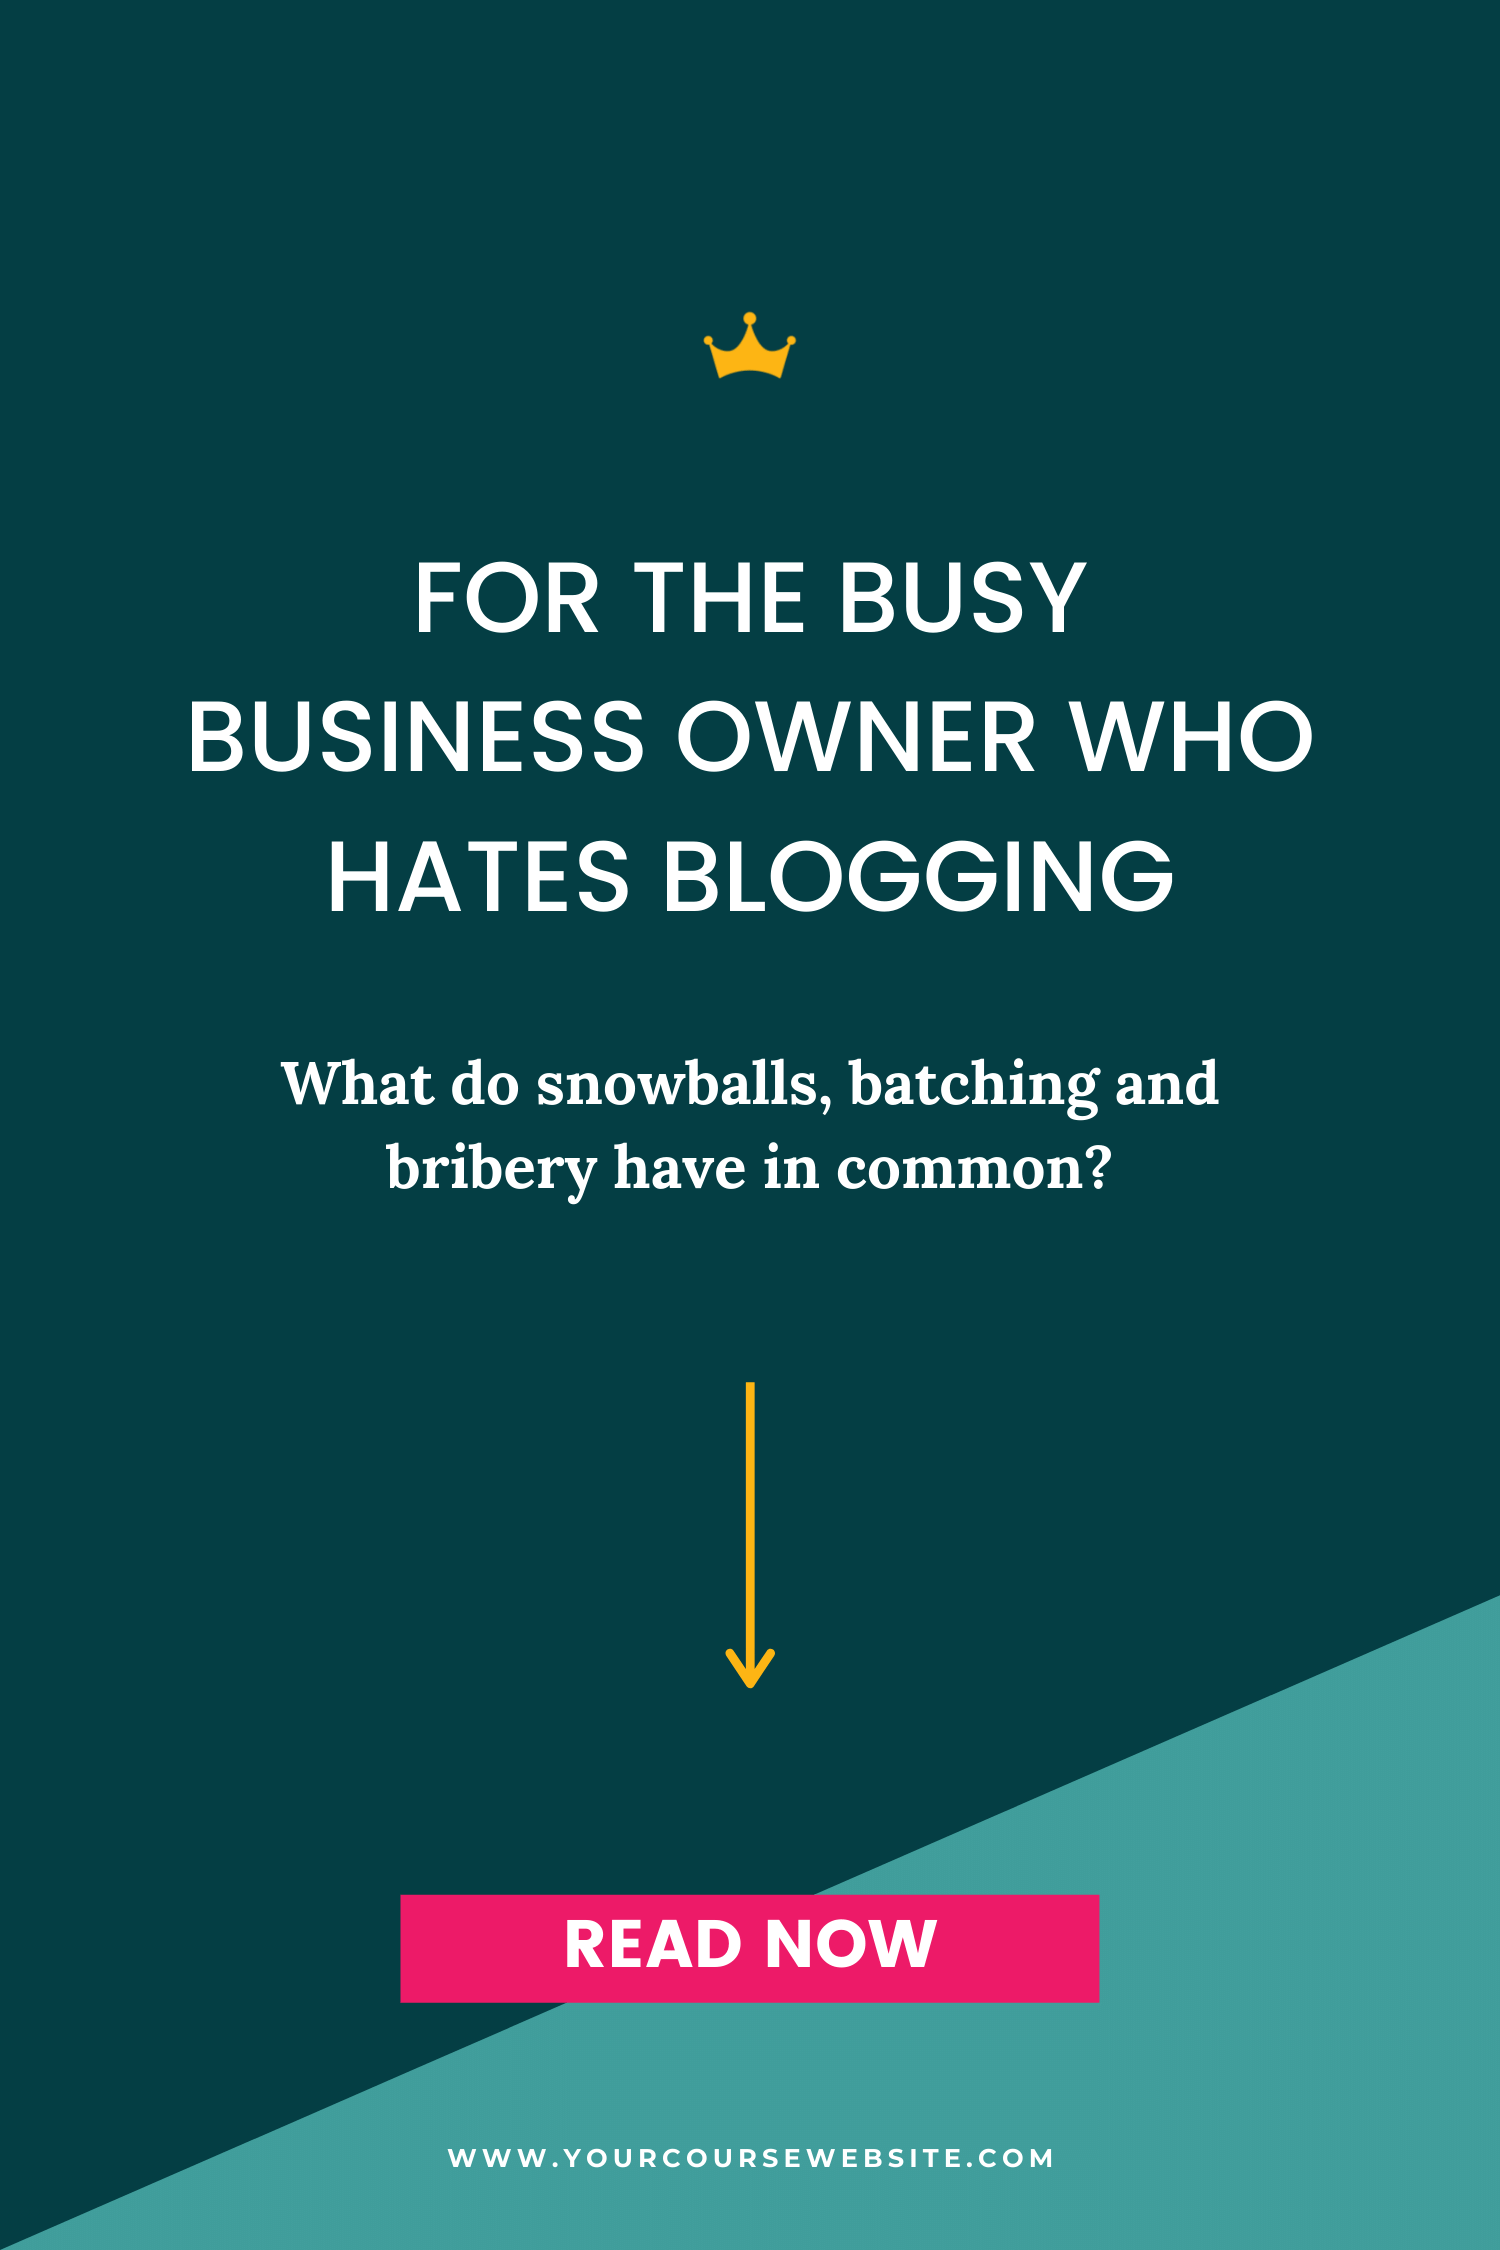 For the Busy Business Owner Who Hates Blogging